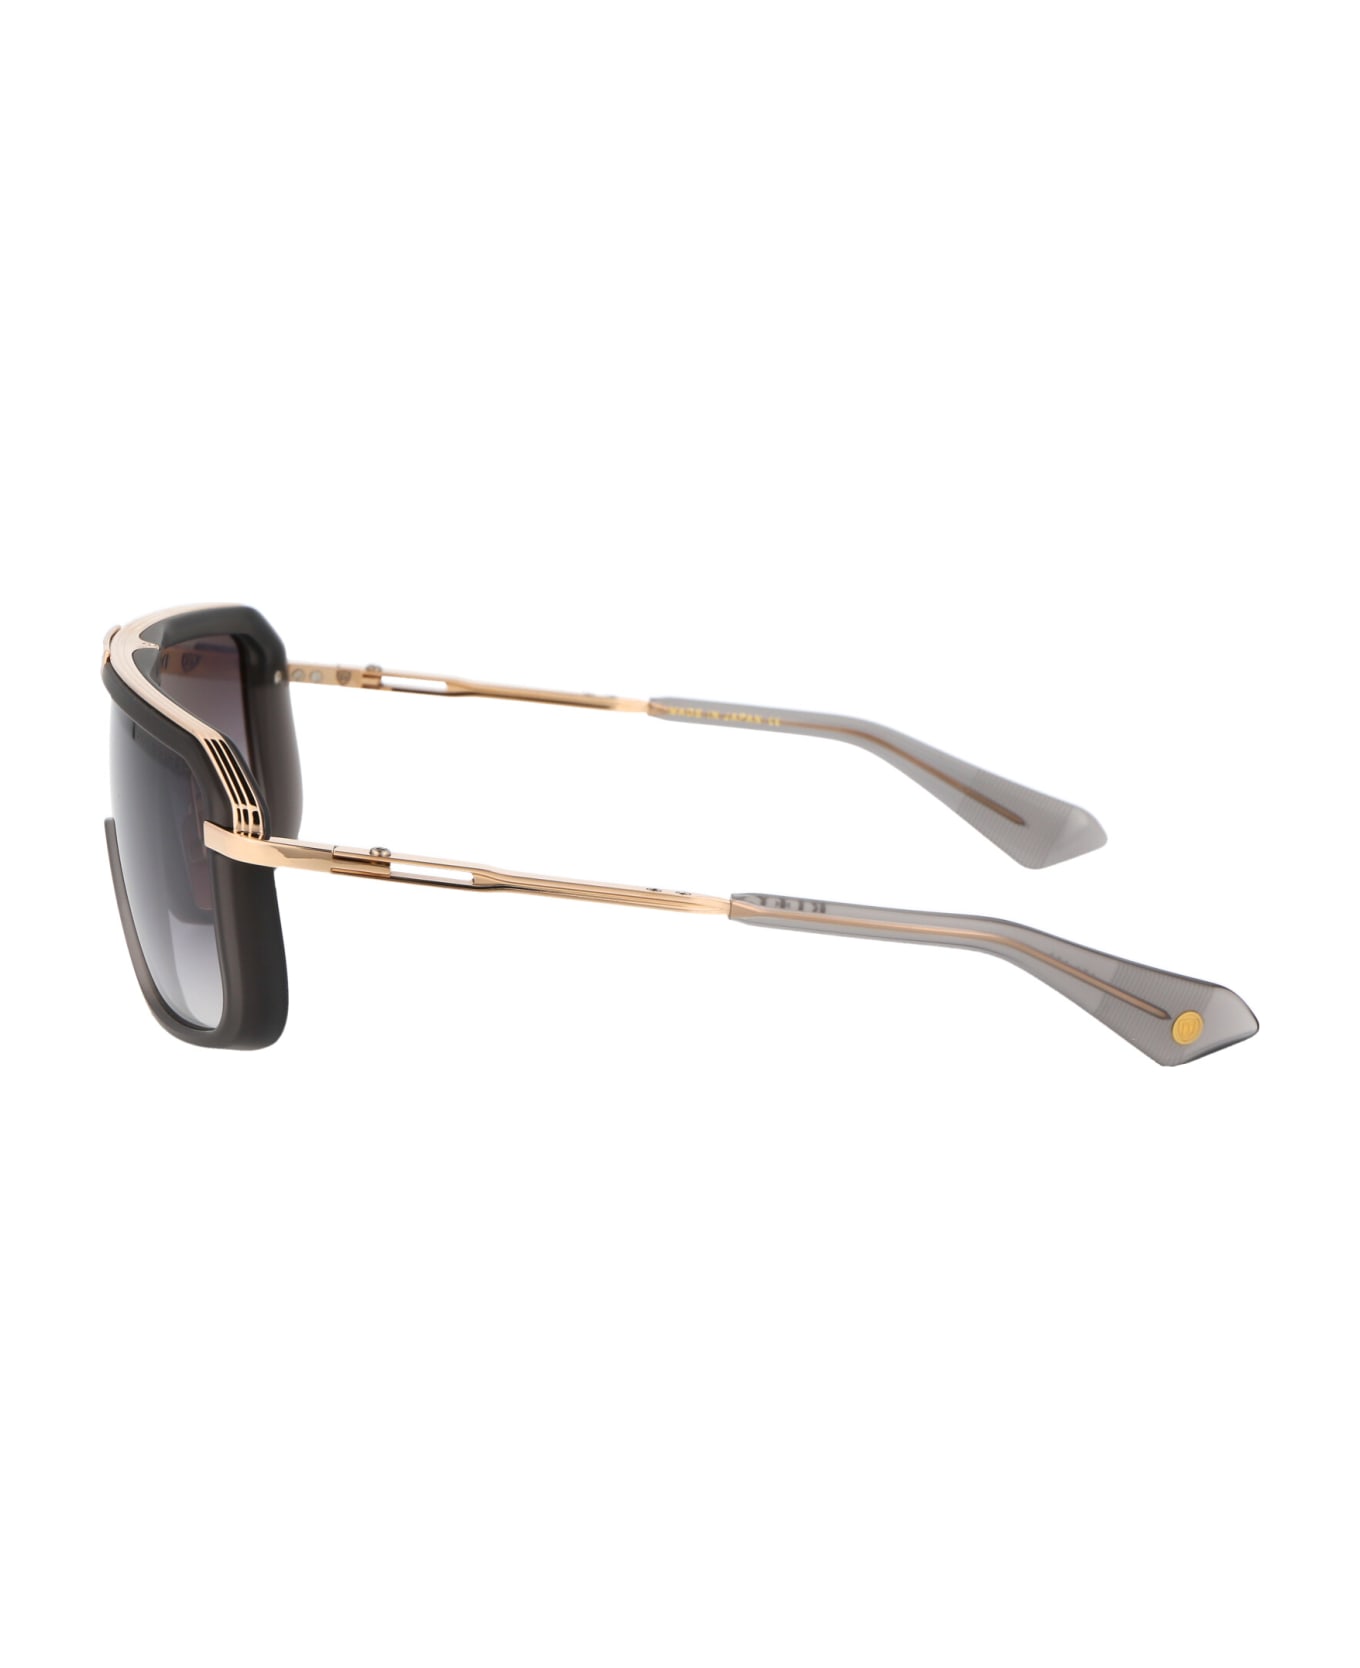 Dita Mach-eight Sunglasses - Satin Crystal Grey - White Gold to Clear サングラス